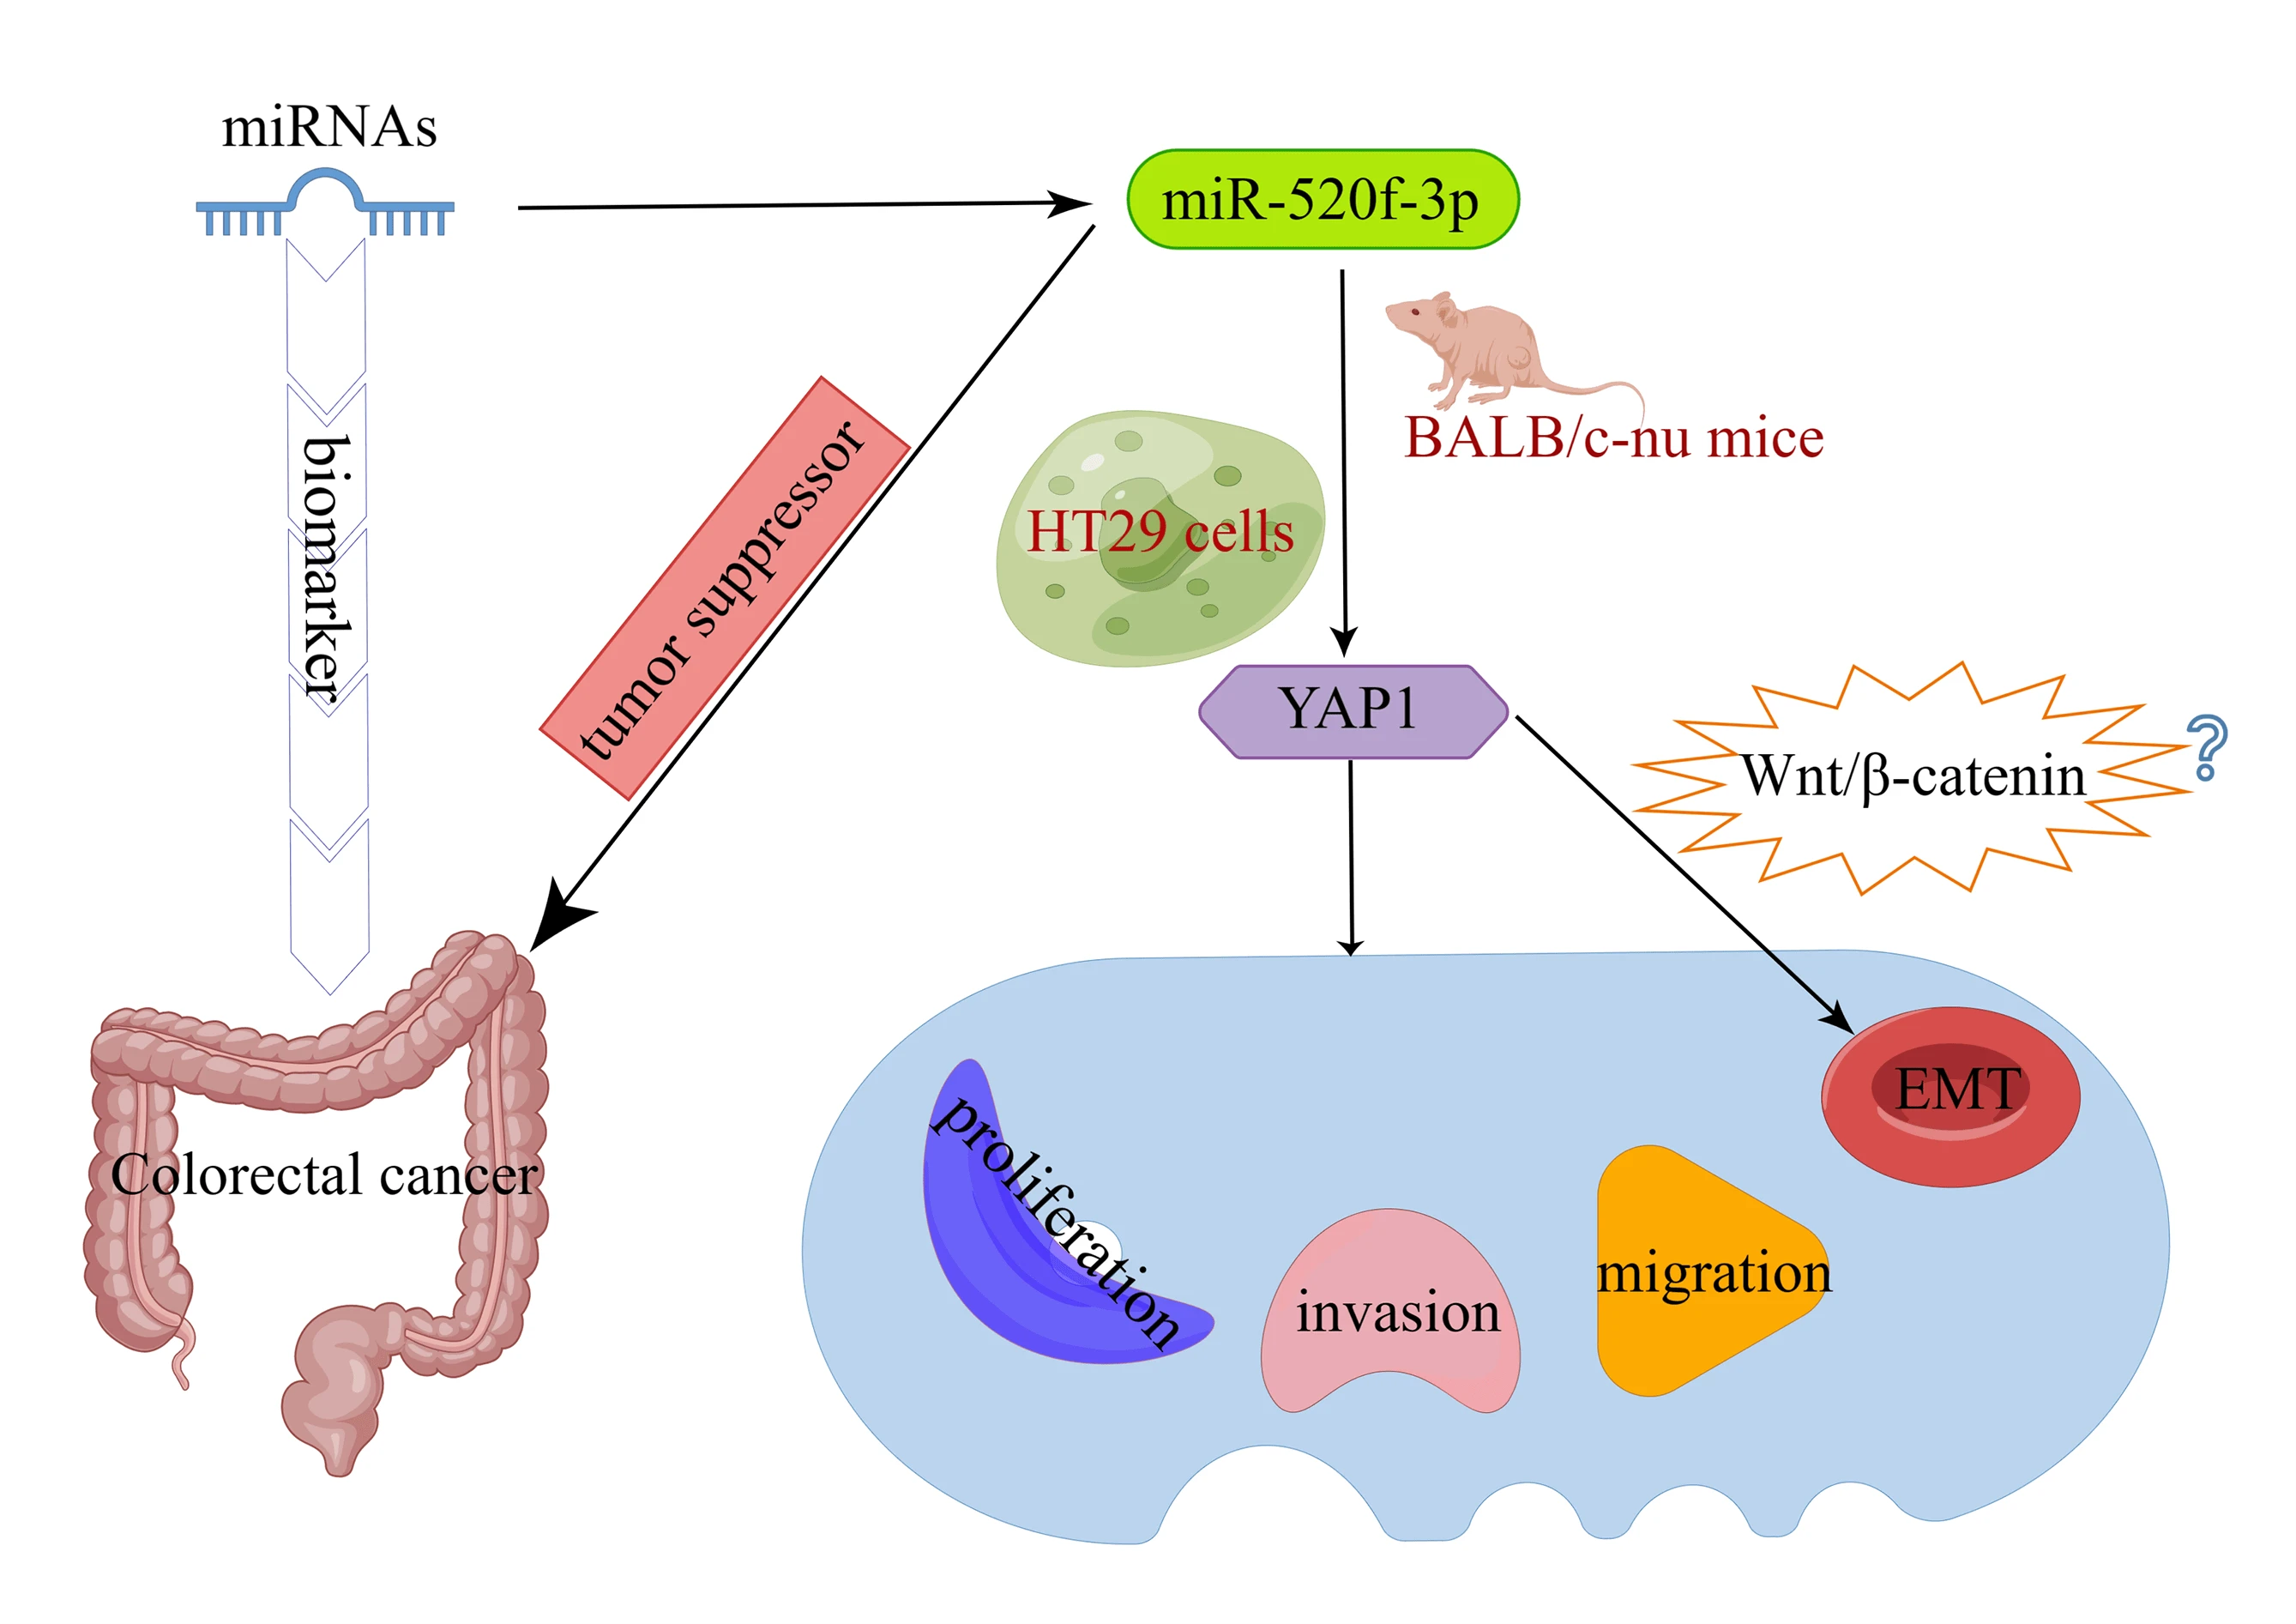 MiR-520f-3p inhibits epithelial-mesenchymal transition of colorectal cancer cells by targeting Yes-associated protein 1